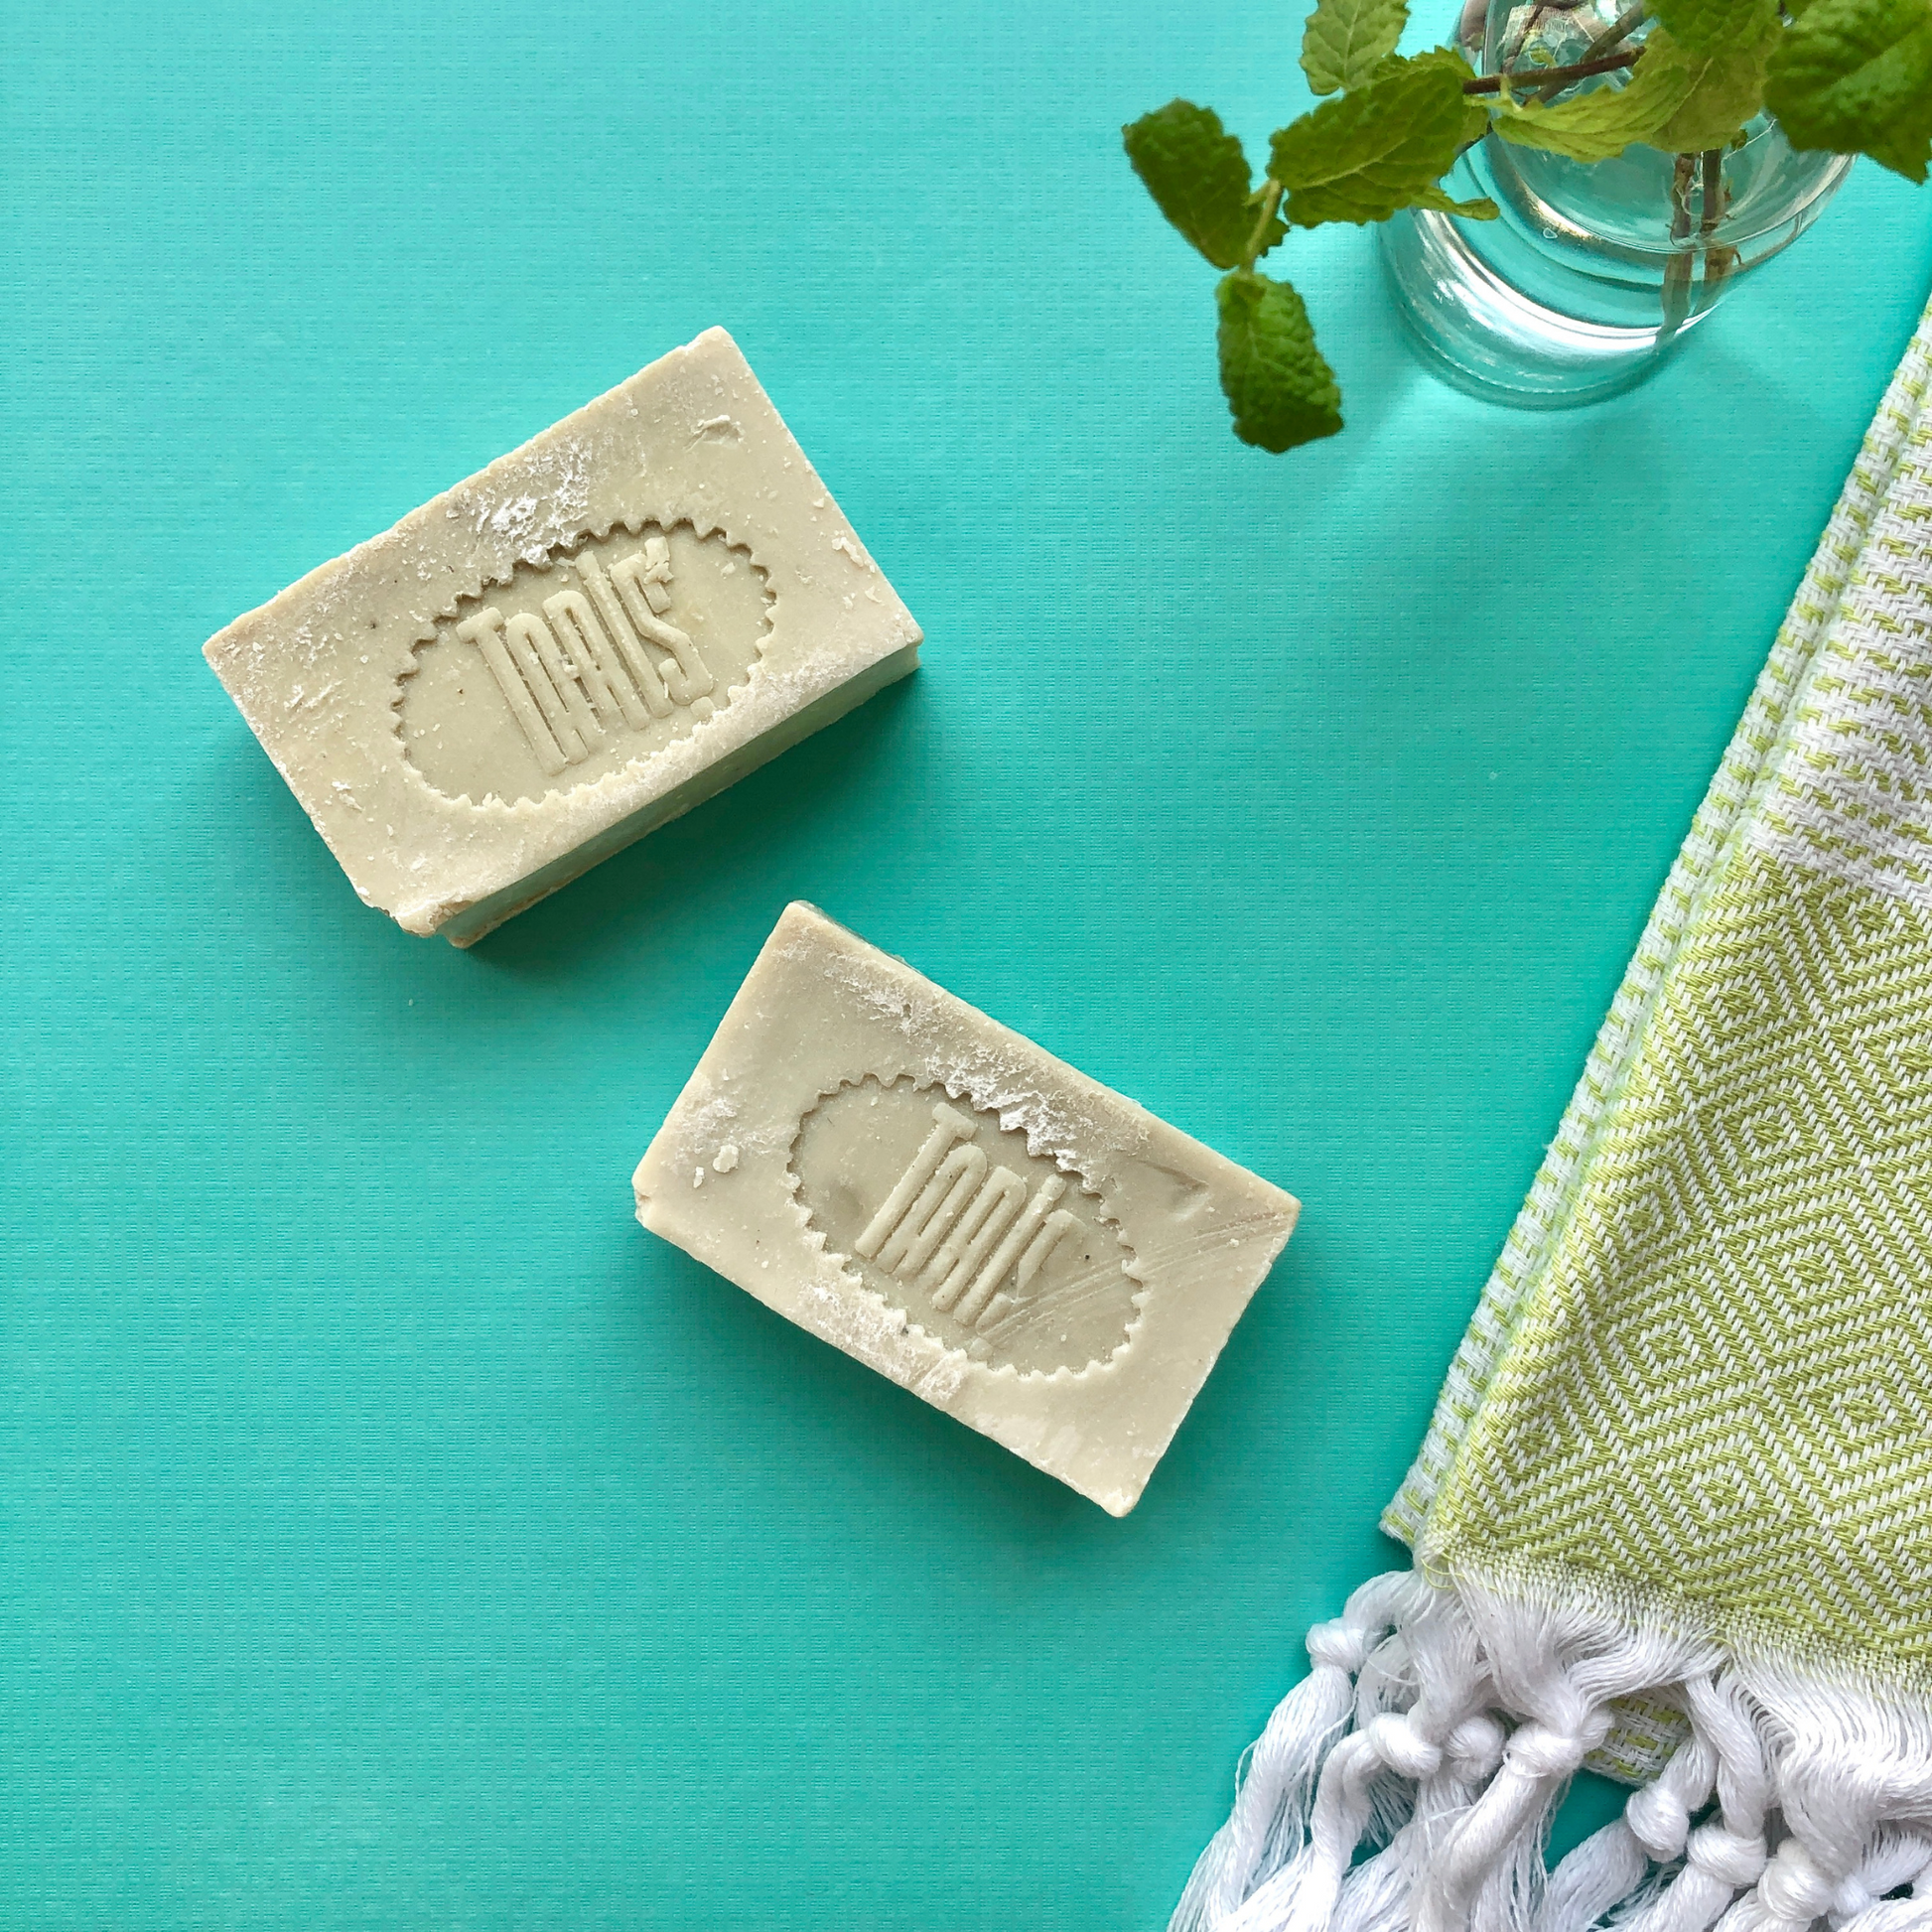 2 bars of OLIVE OIL Soaps next to green Turkish hand towel and mint branches in a vase on turquoise background